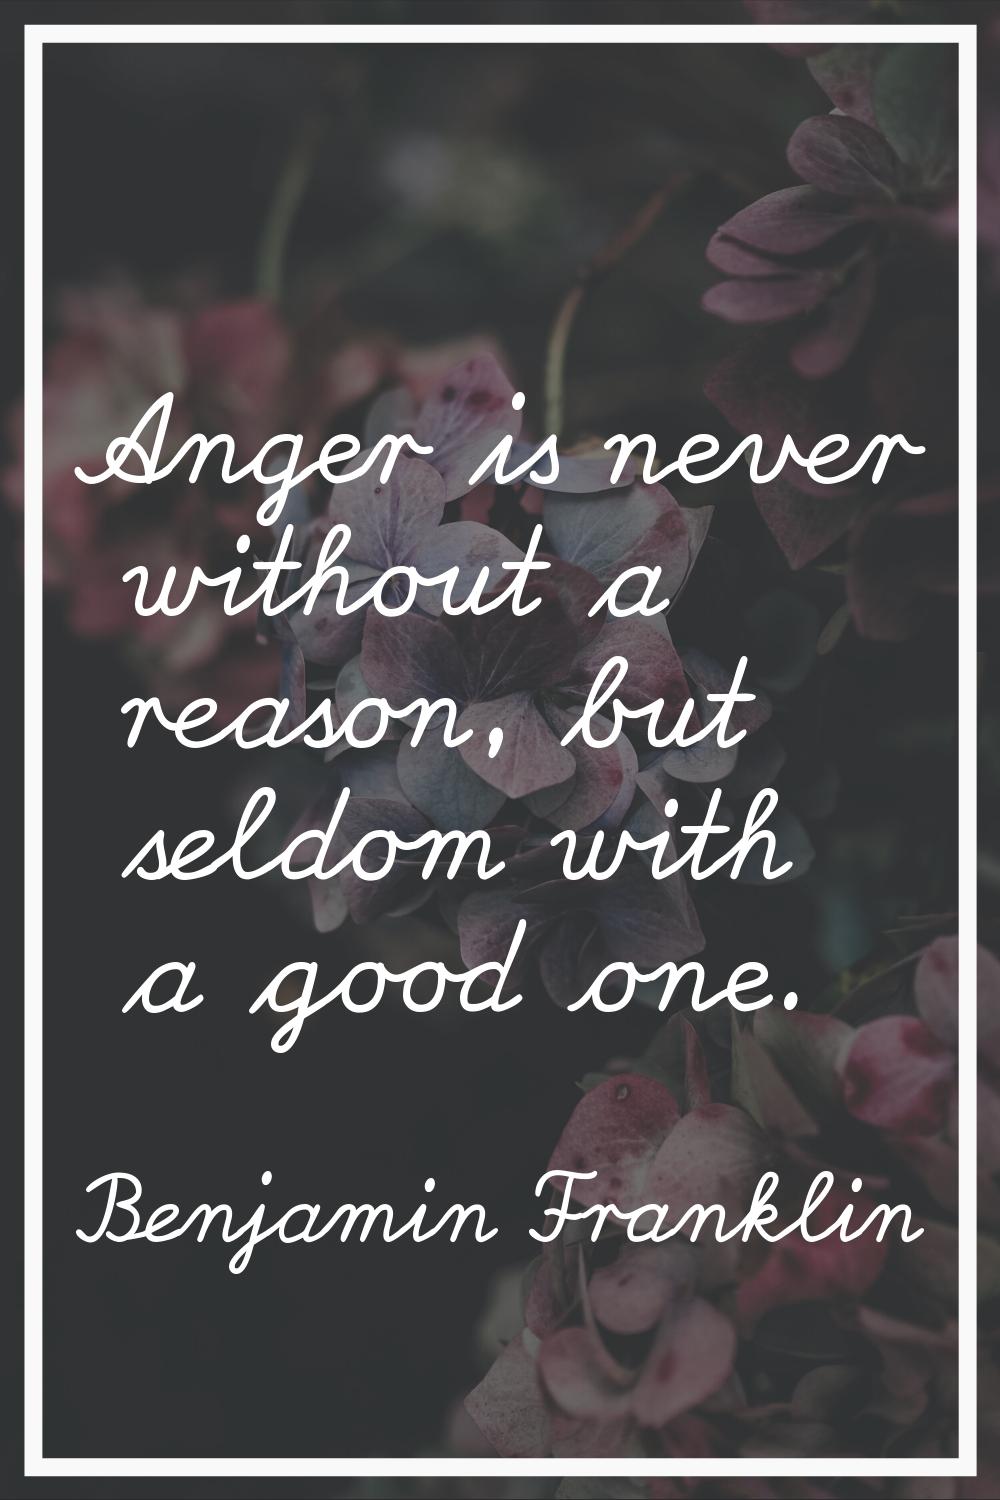 Anger is never without a reason, but seldom with a good one.